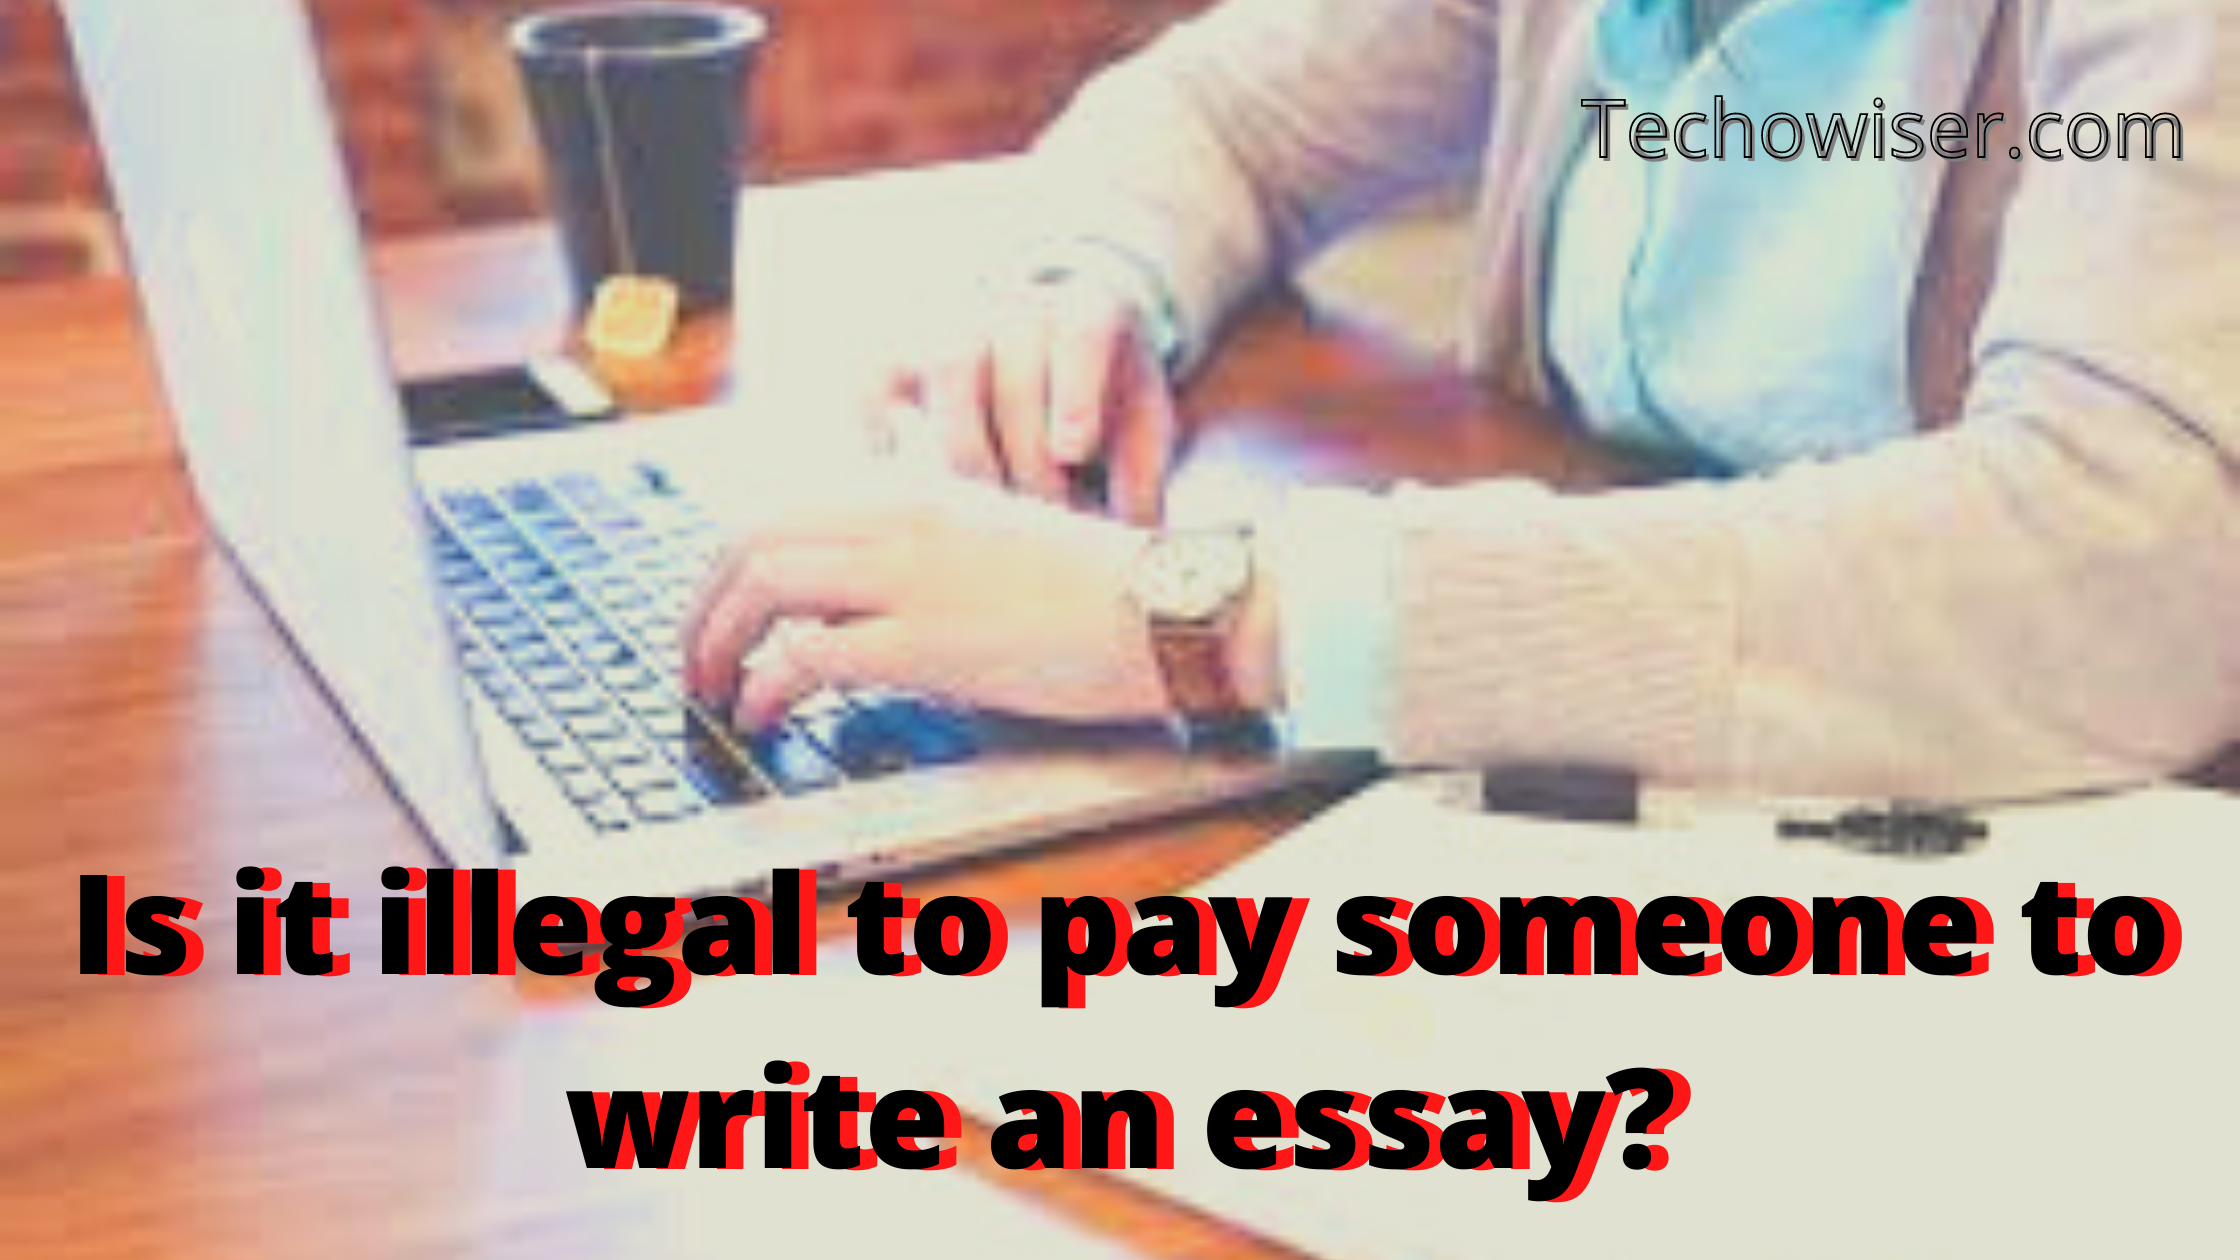 Is it illegal to pay someone to write an essay?